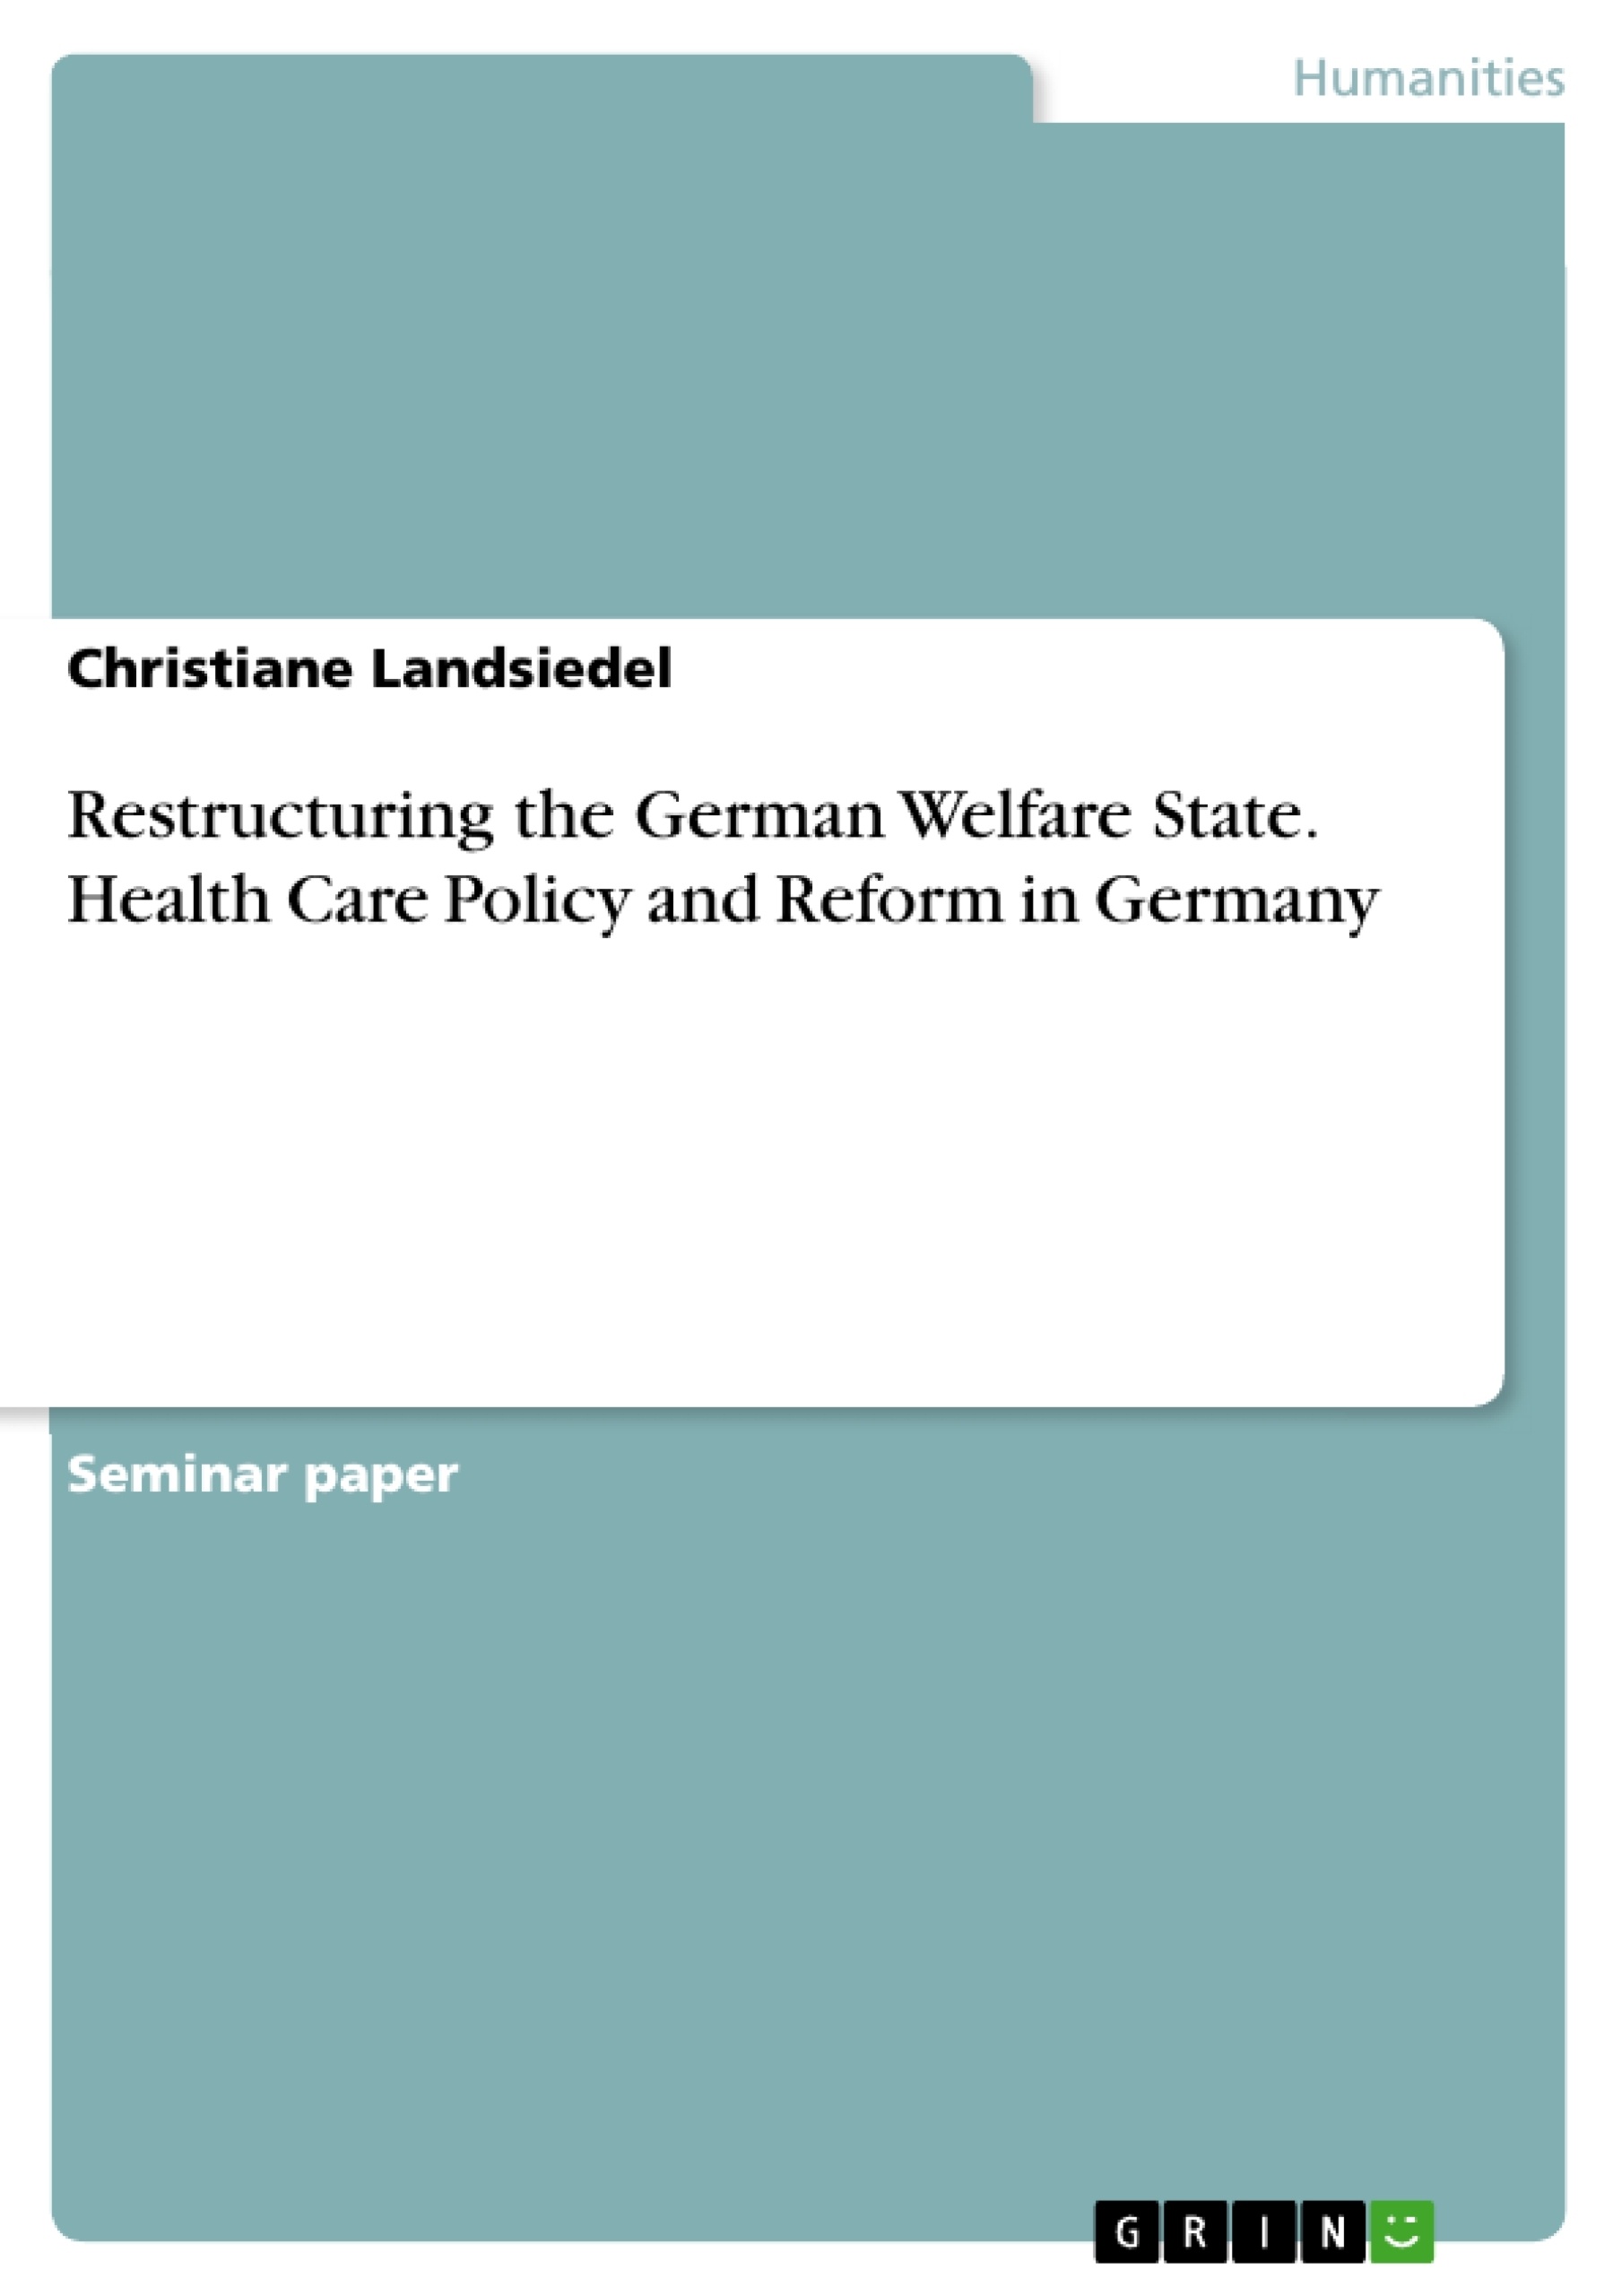 Title: Restructuring the German Welfare State. Health Care Policy and Reform in Germany